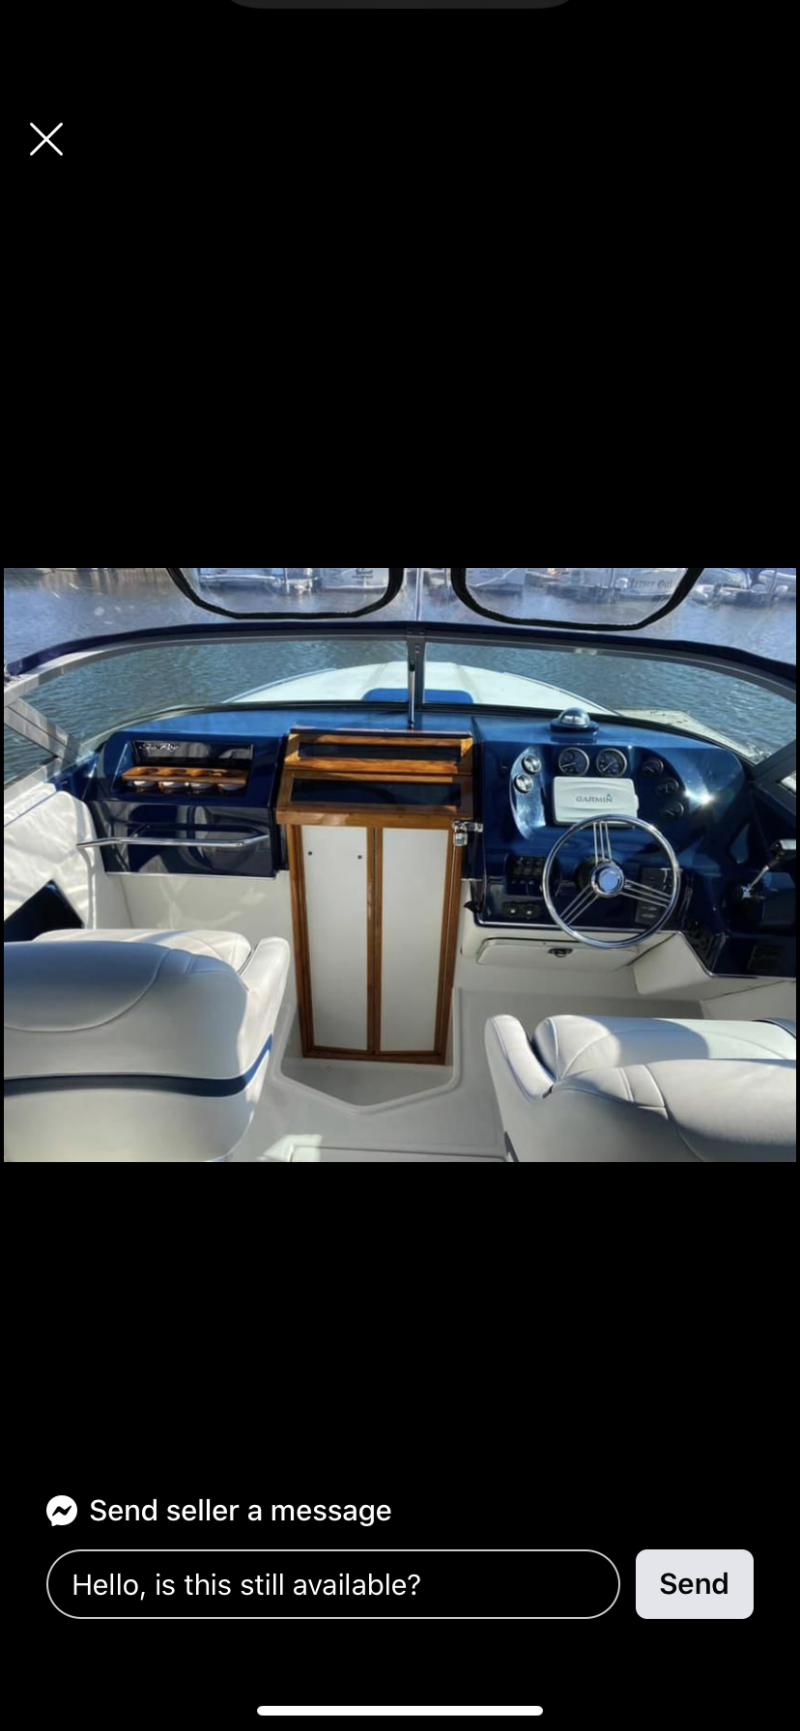 1990 Sea Ray 260 overnighter  Power boat for sale in Rutledge, PA - image 21 